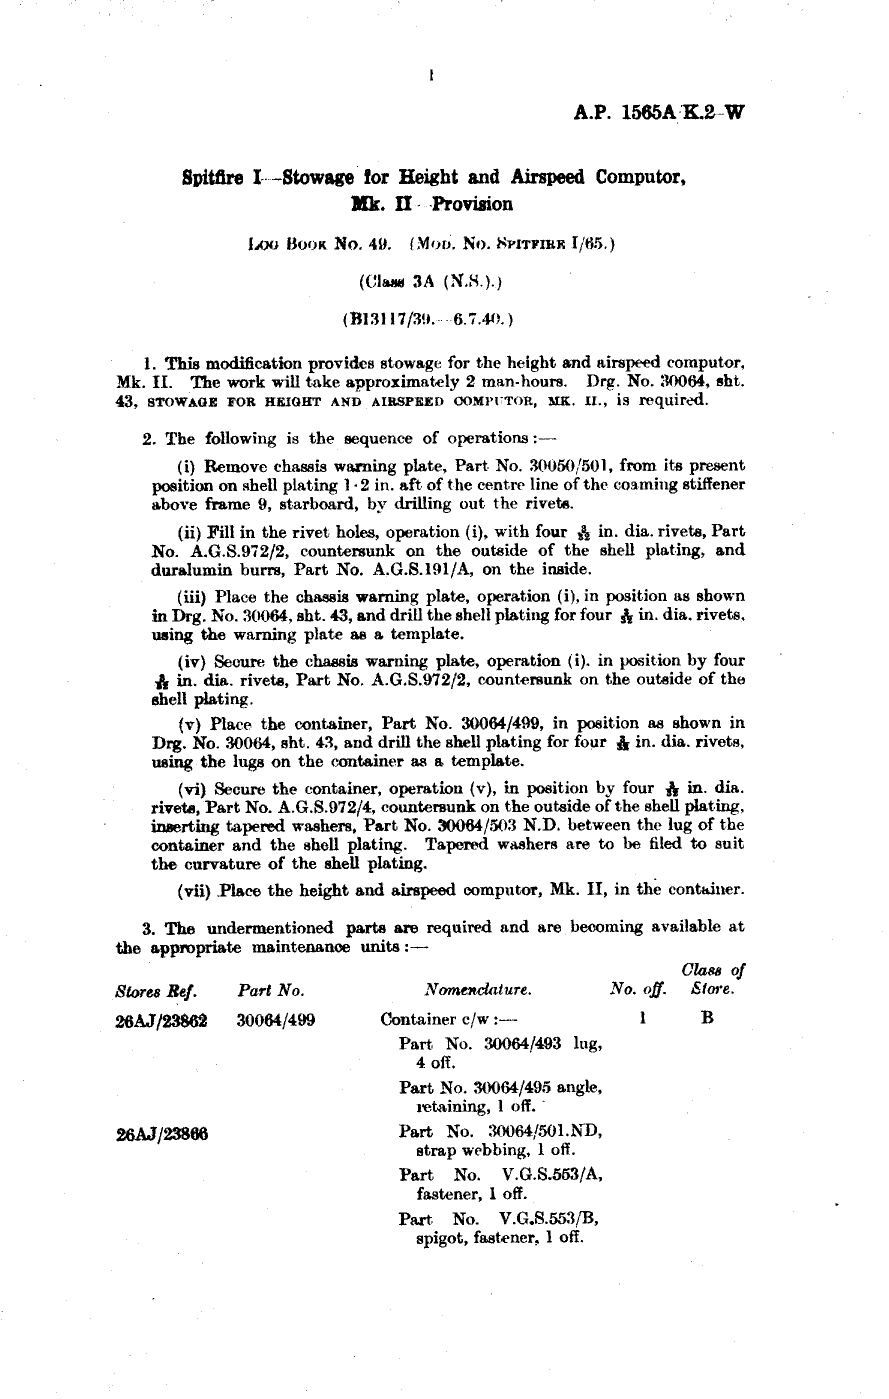 Sample page 1 from AirCorps Library document: Spitfire I Stowage for Height and Airspeed Computer Mk. II Provision